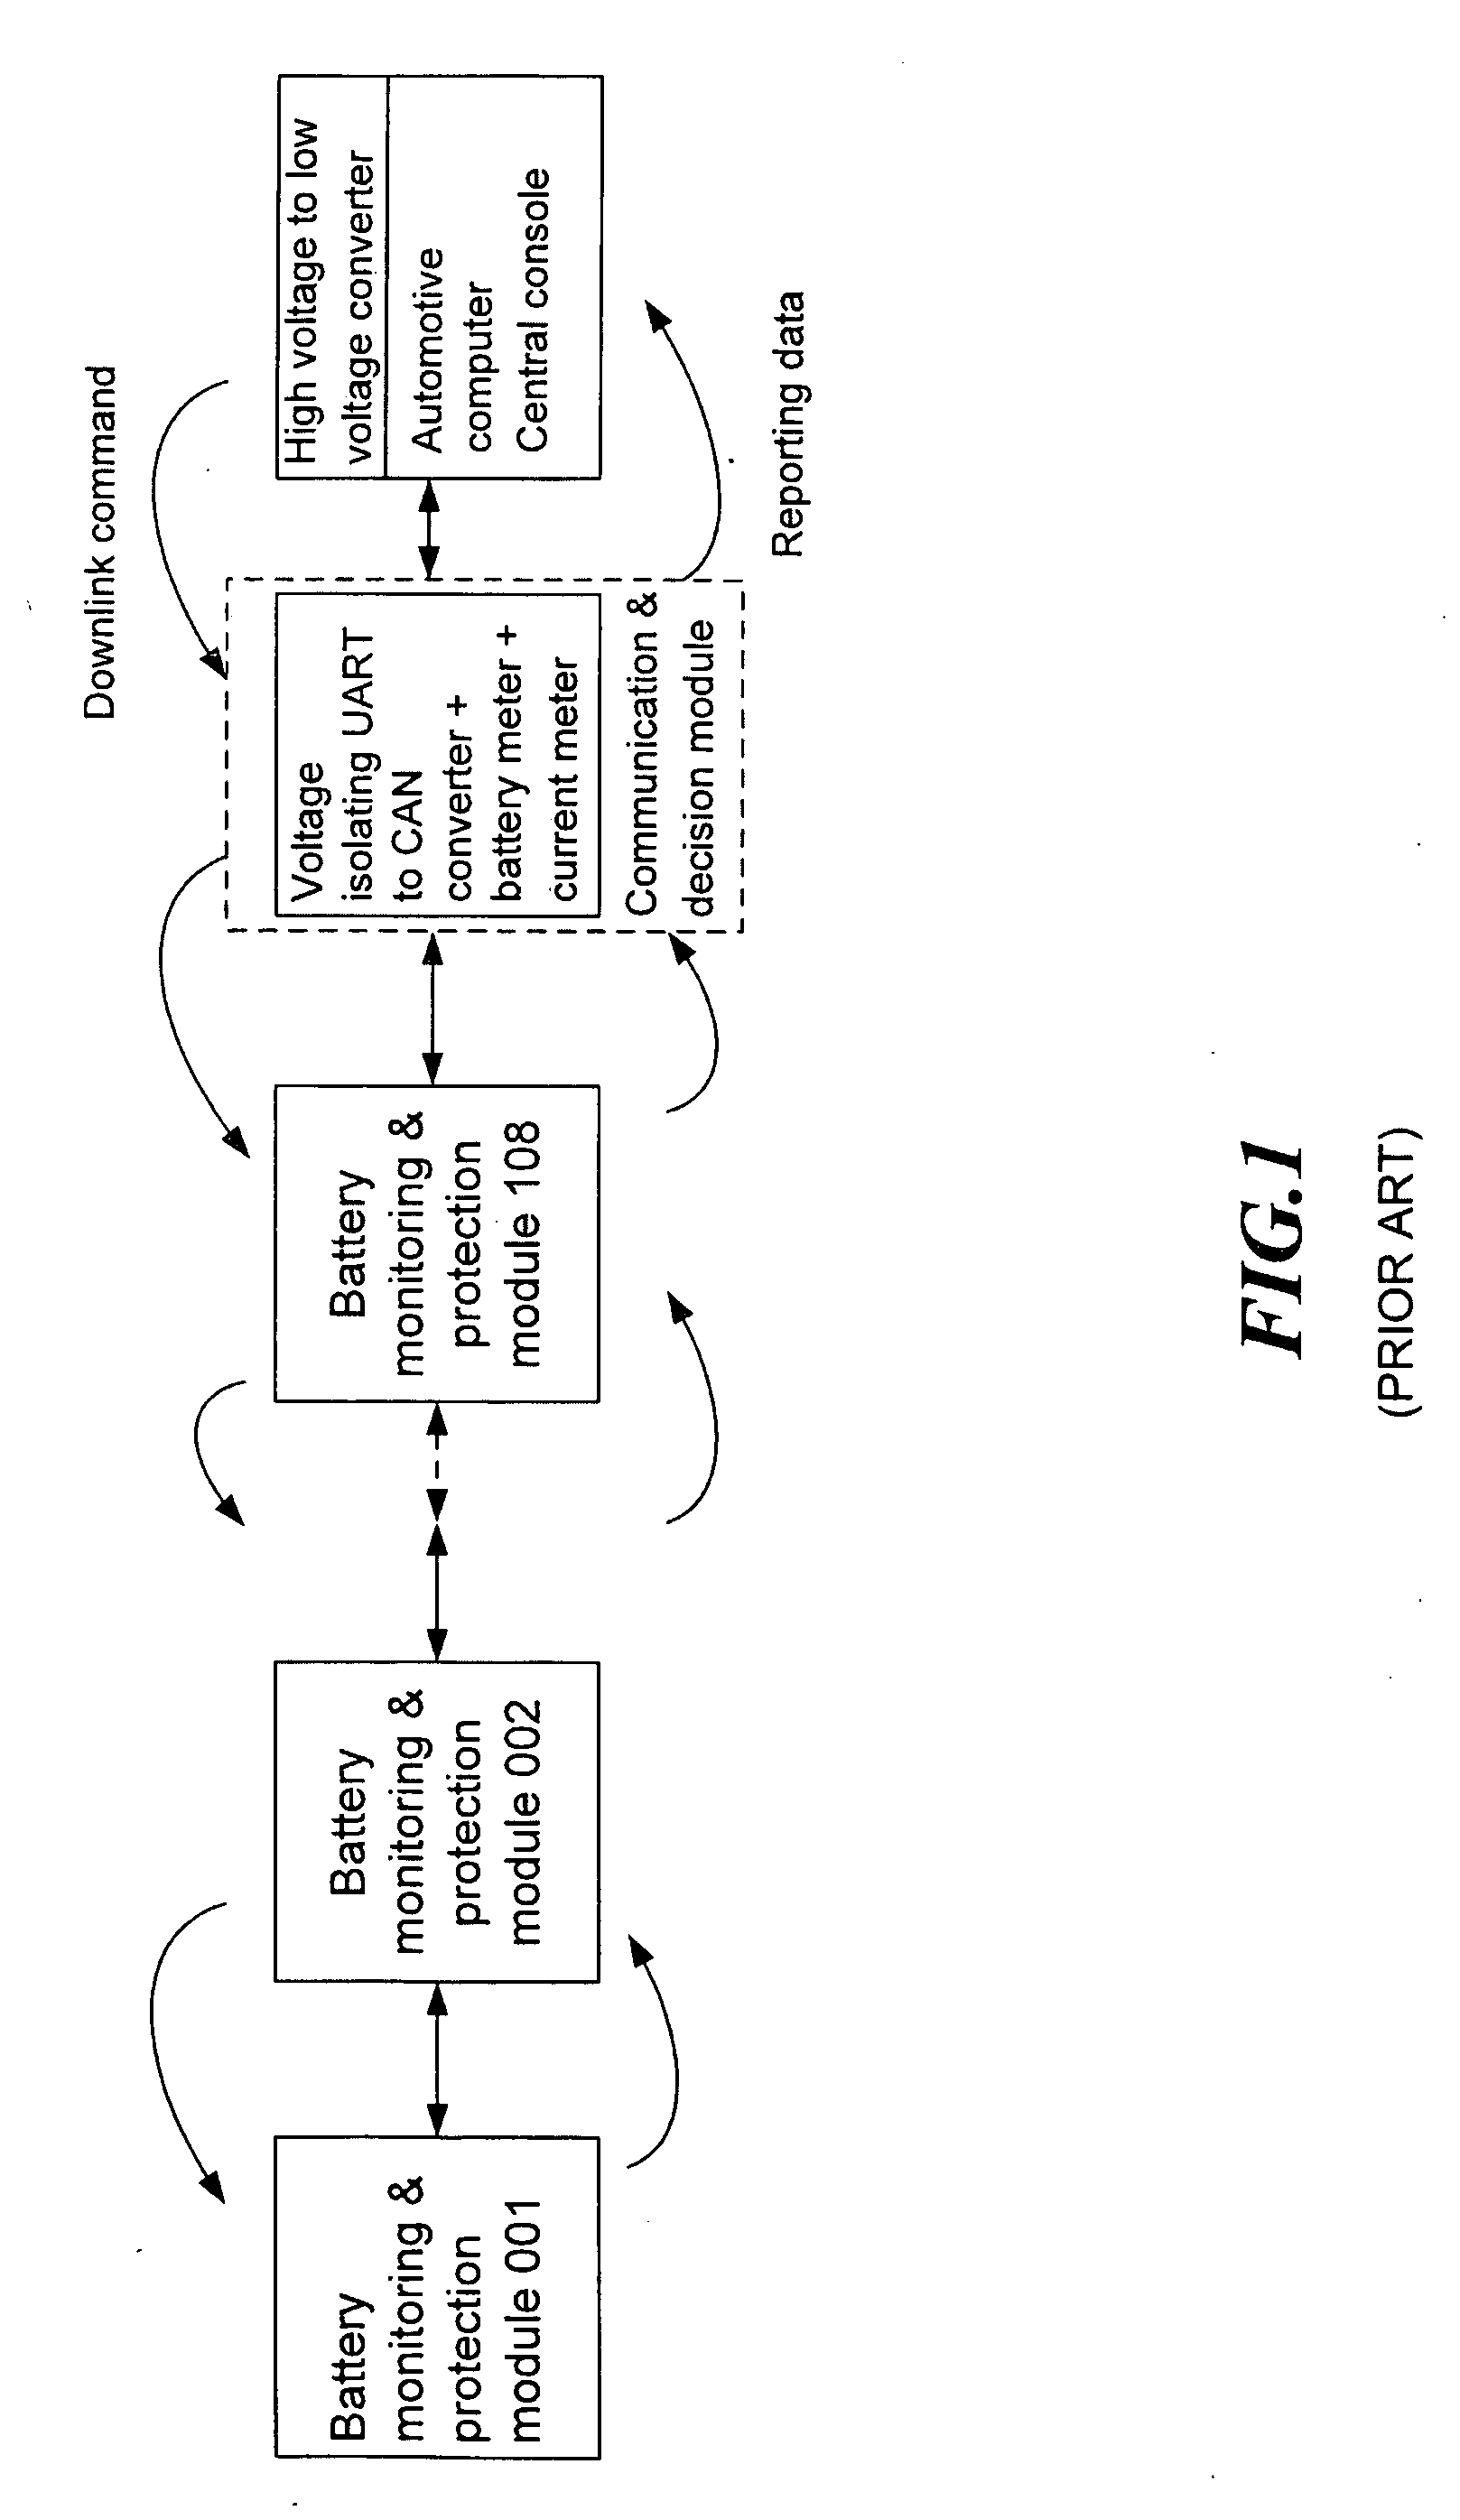 Hierarchical battery management system